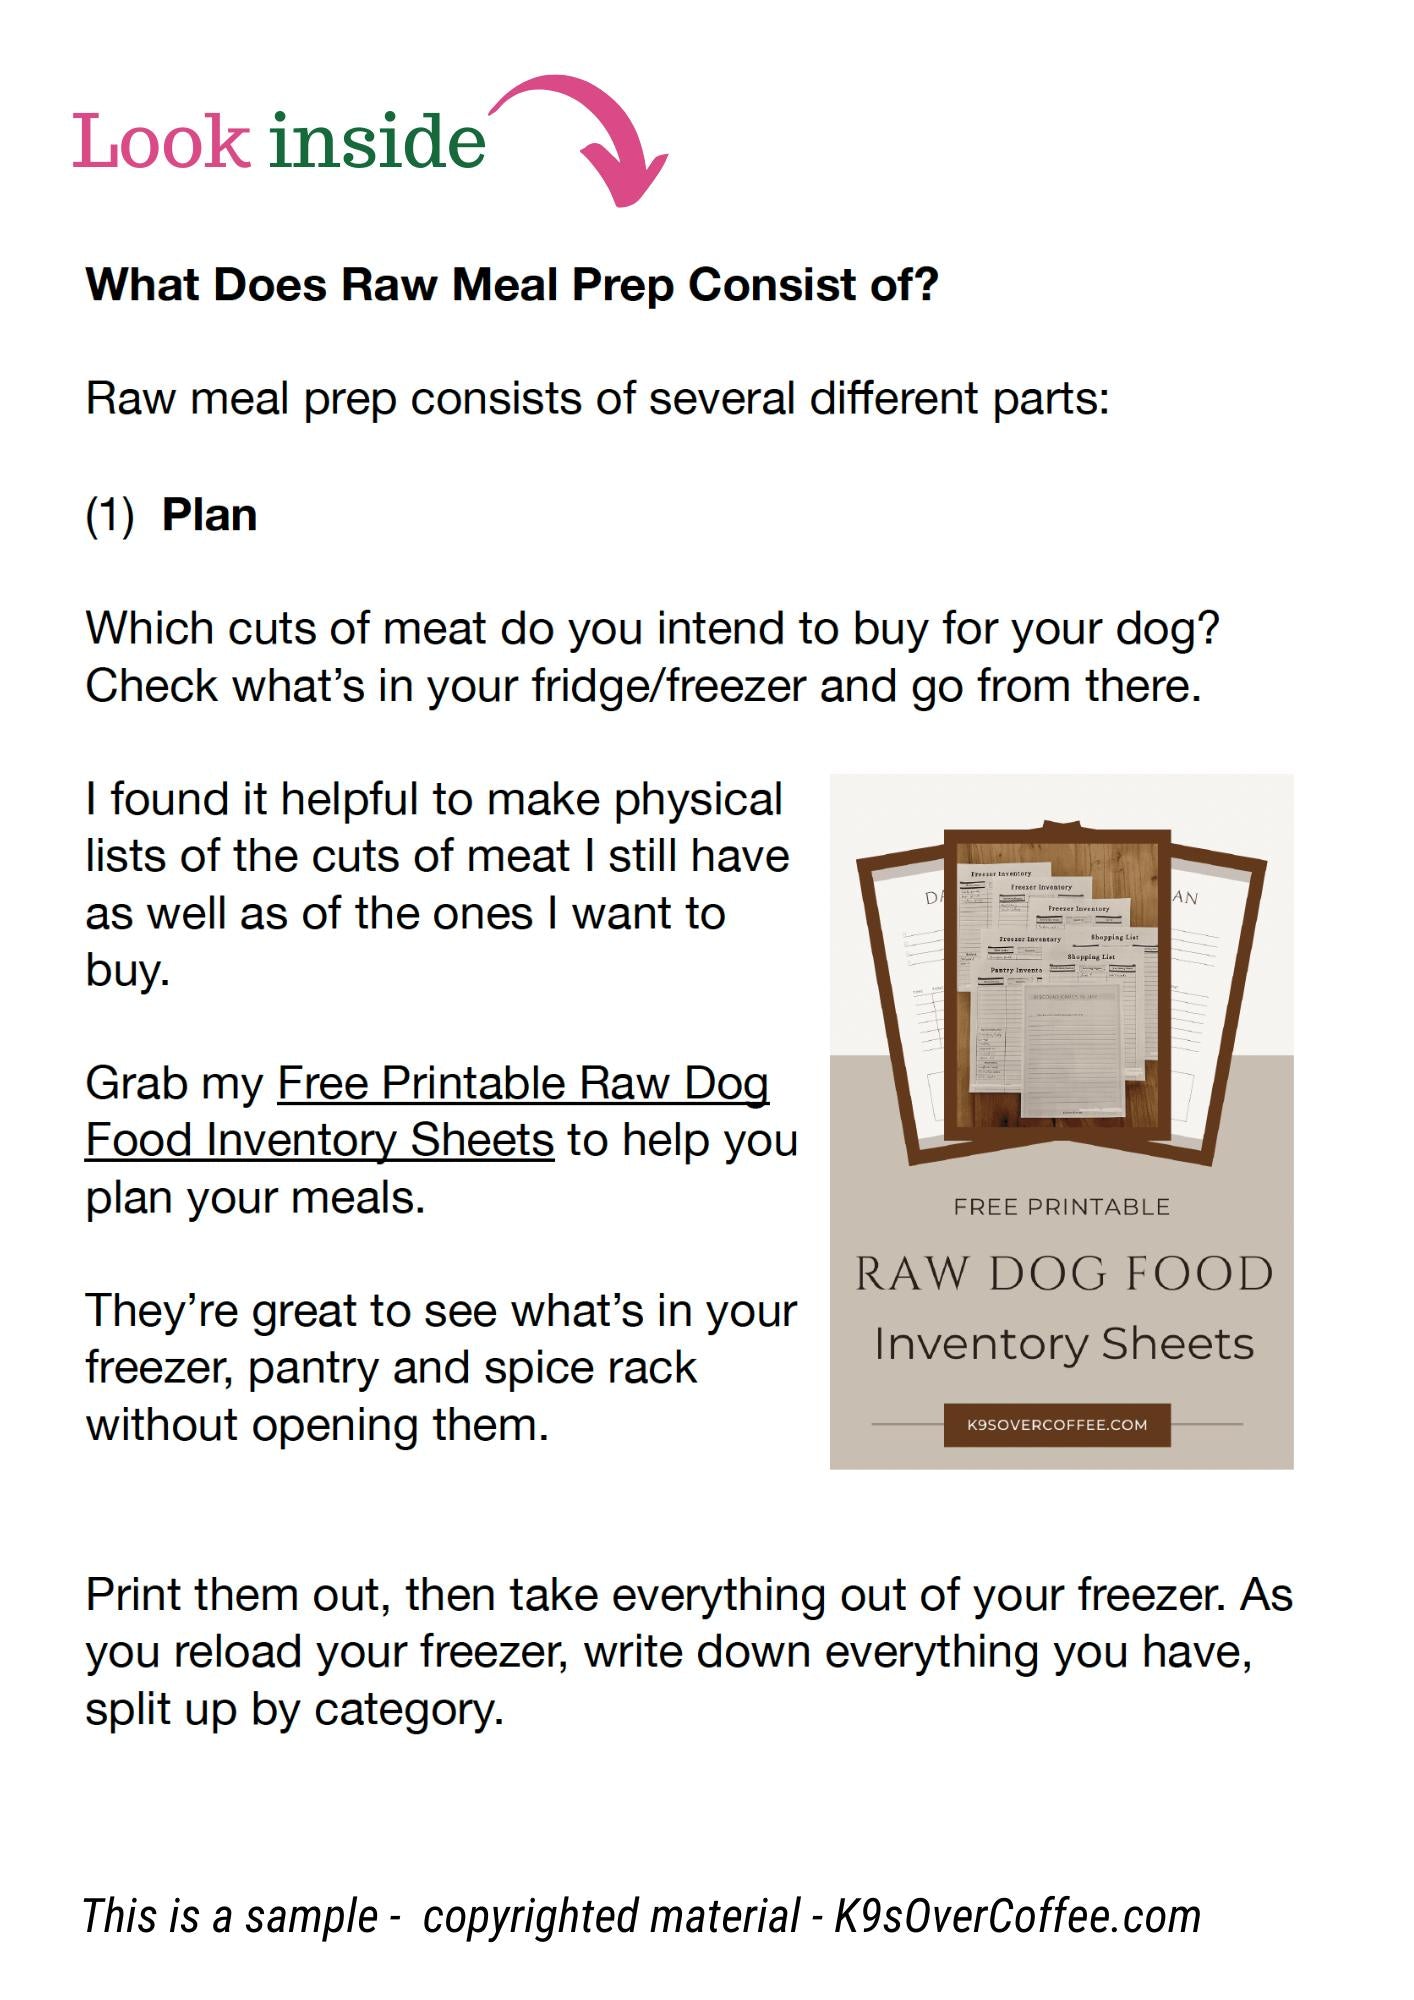 Learn How to Make Affordable Bulk Raw Dog Food, No Pet Nutritionist Needed! Includes 2 Easy Raw Dog Food Recipes